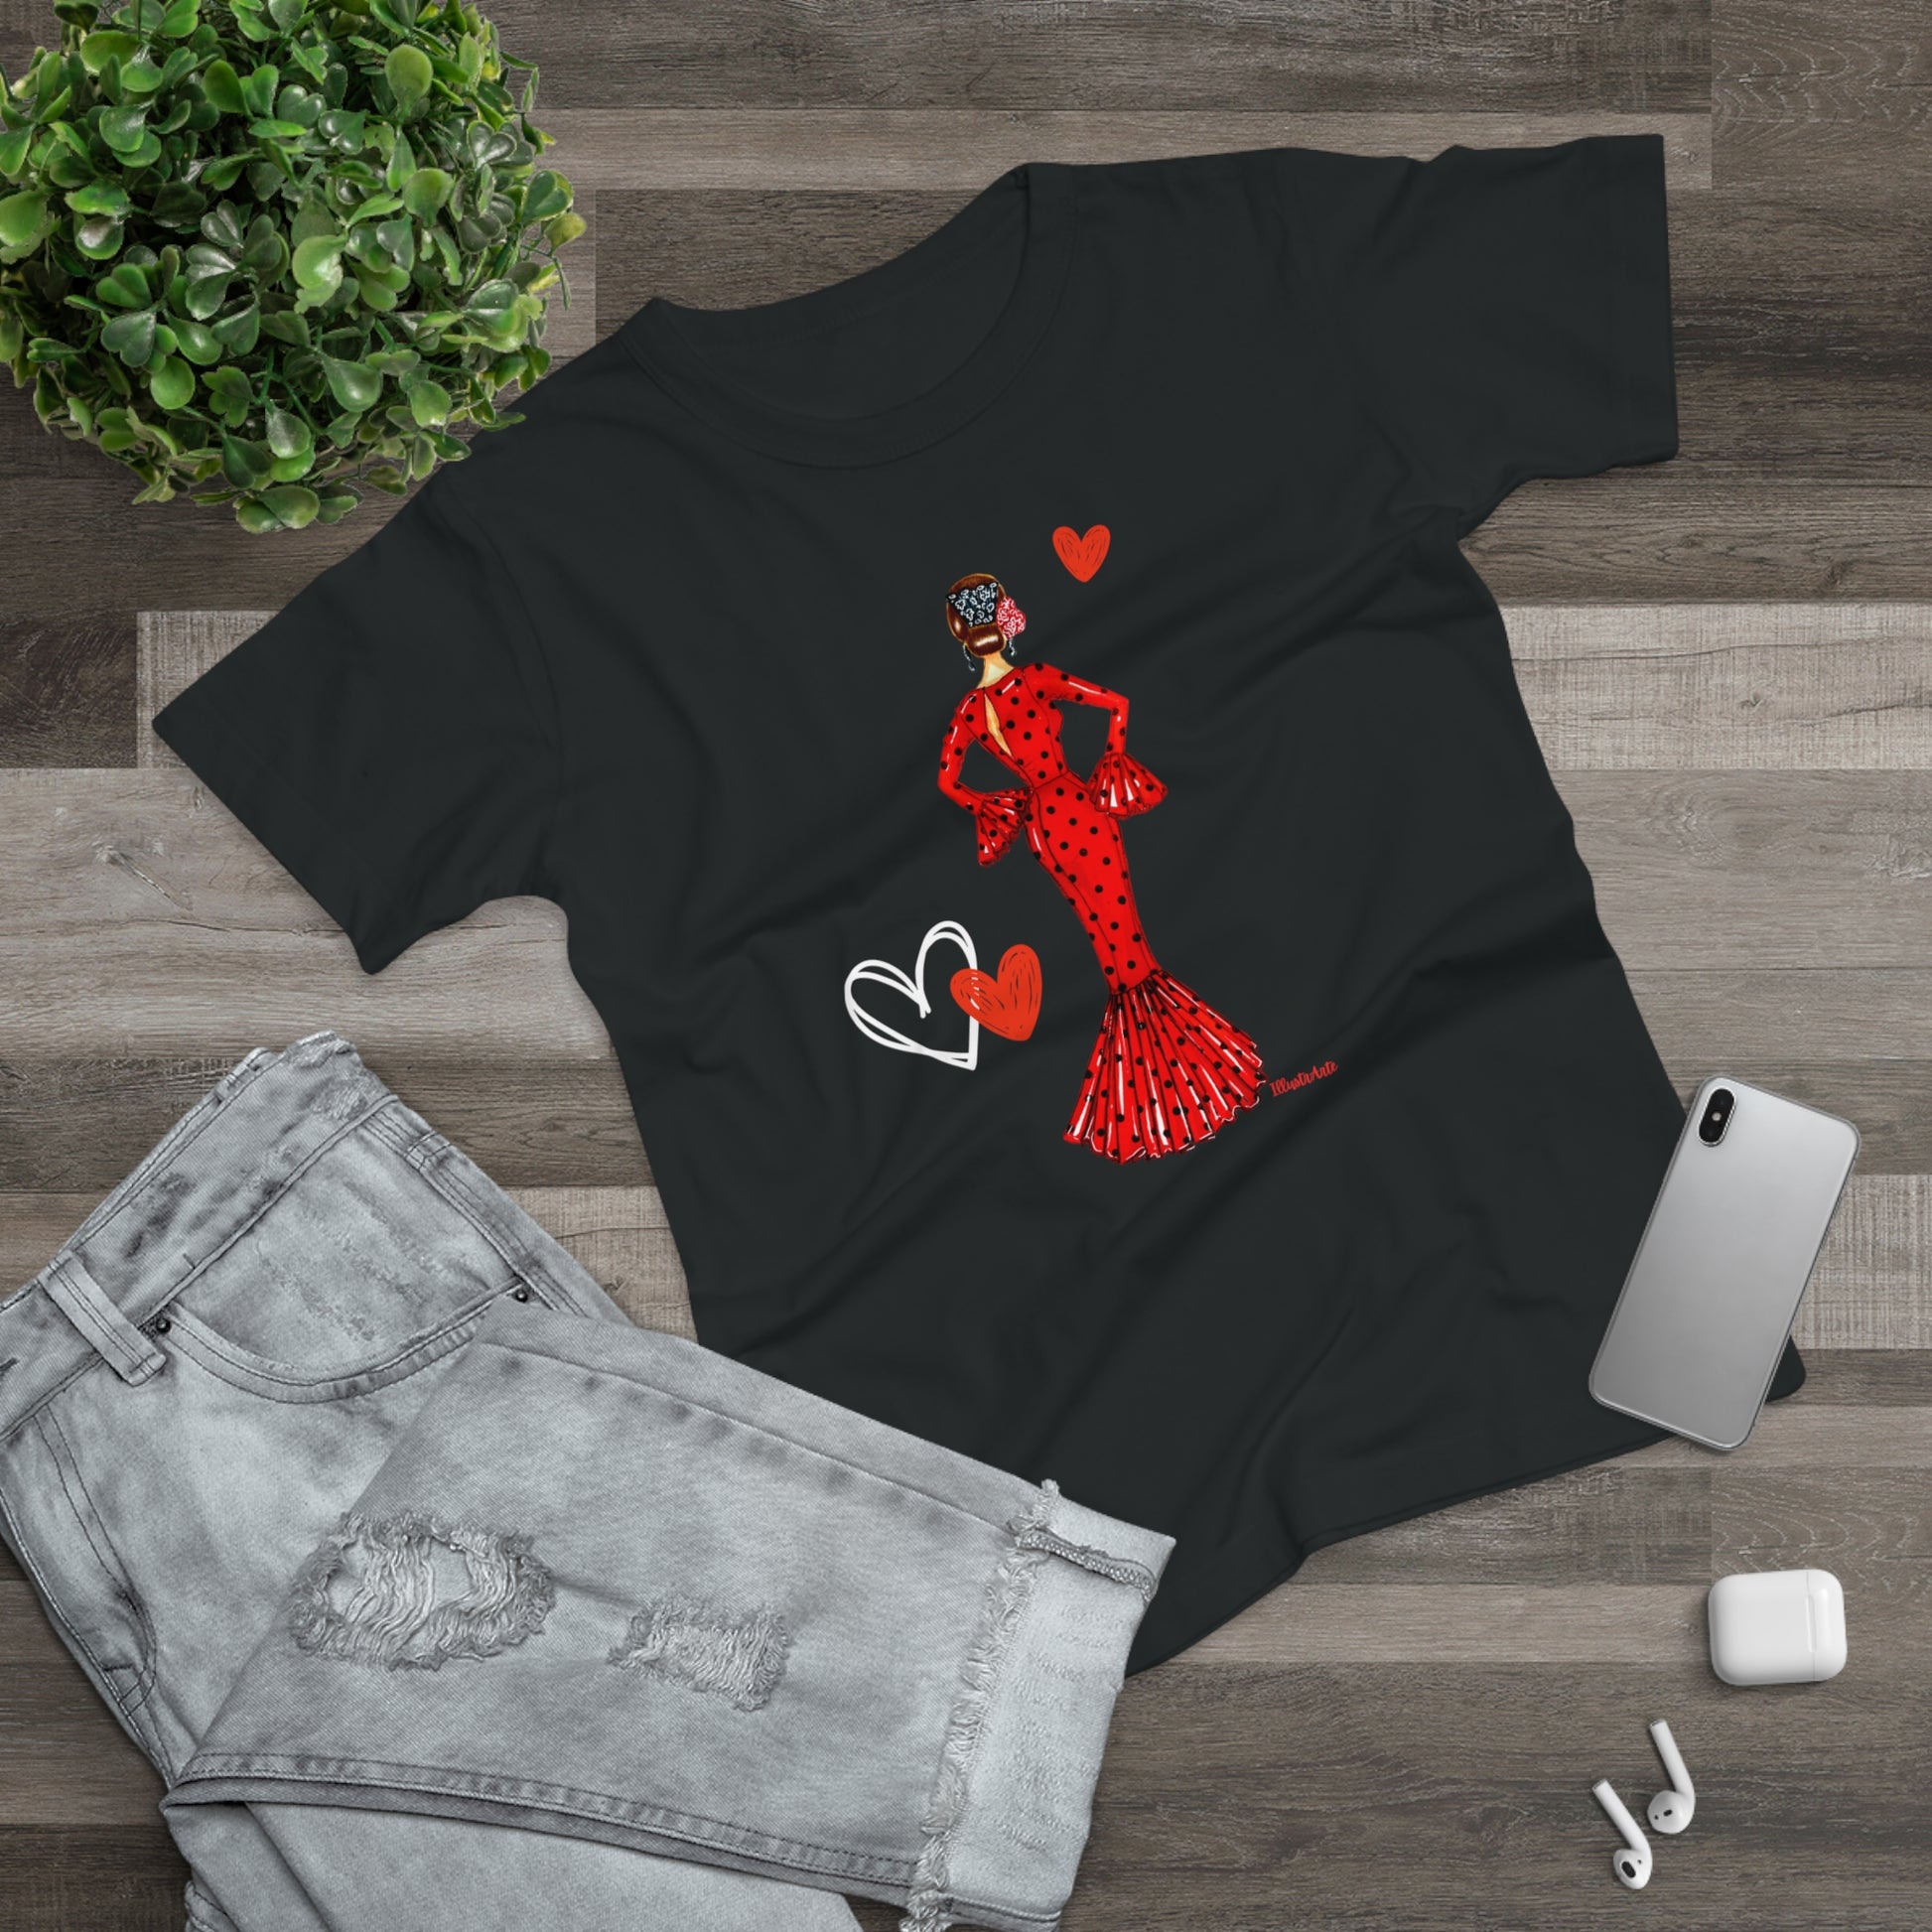 a t - shirt with a red dress and hearts on it